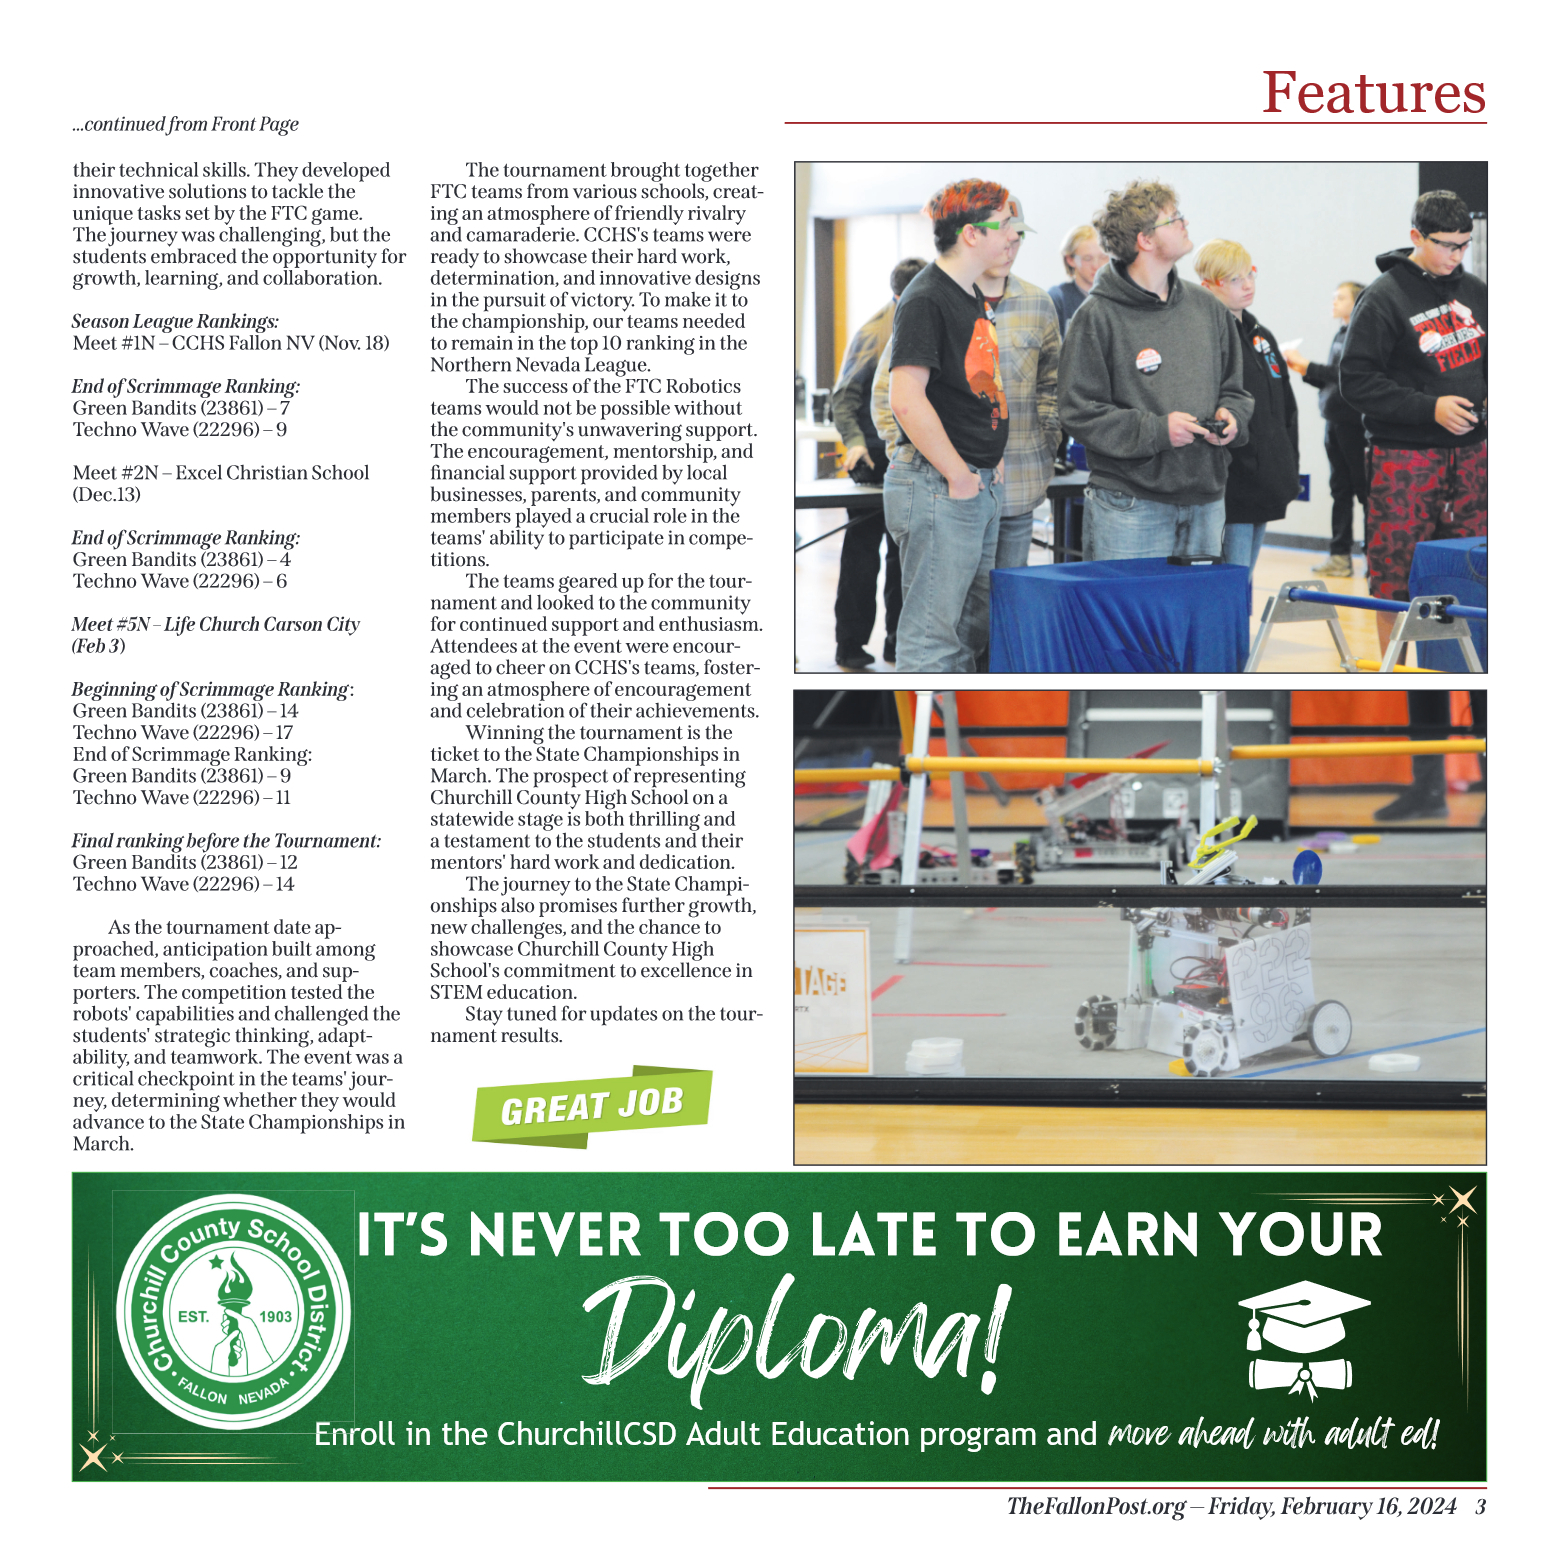 February 16, 2024 - CCHS Robotics Team on the Road - page 3